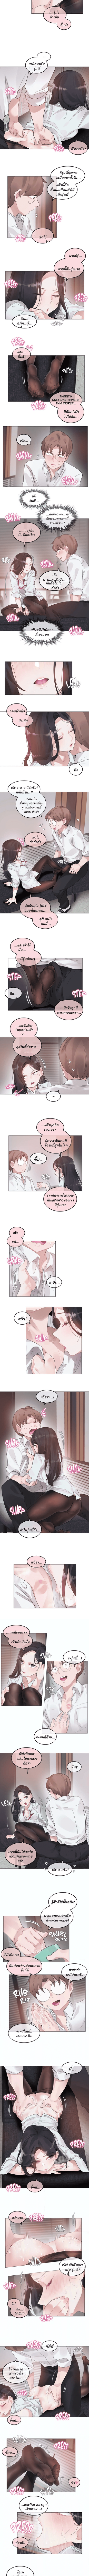 A Pervert’s Daily Life 106 (2)